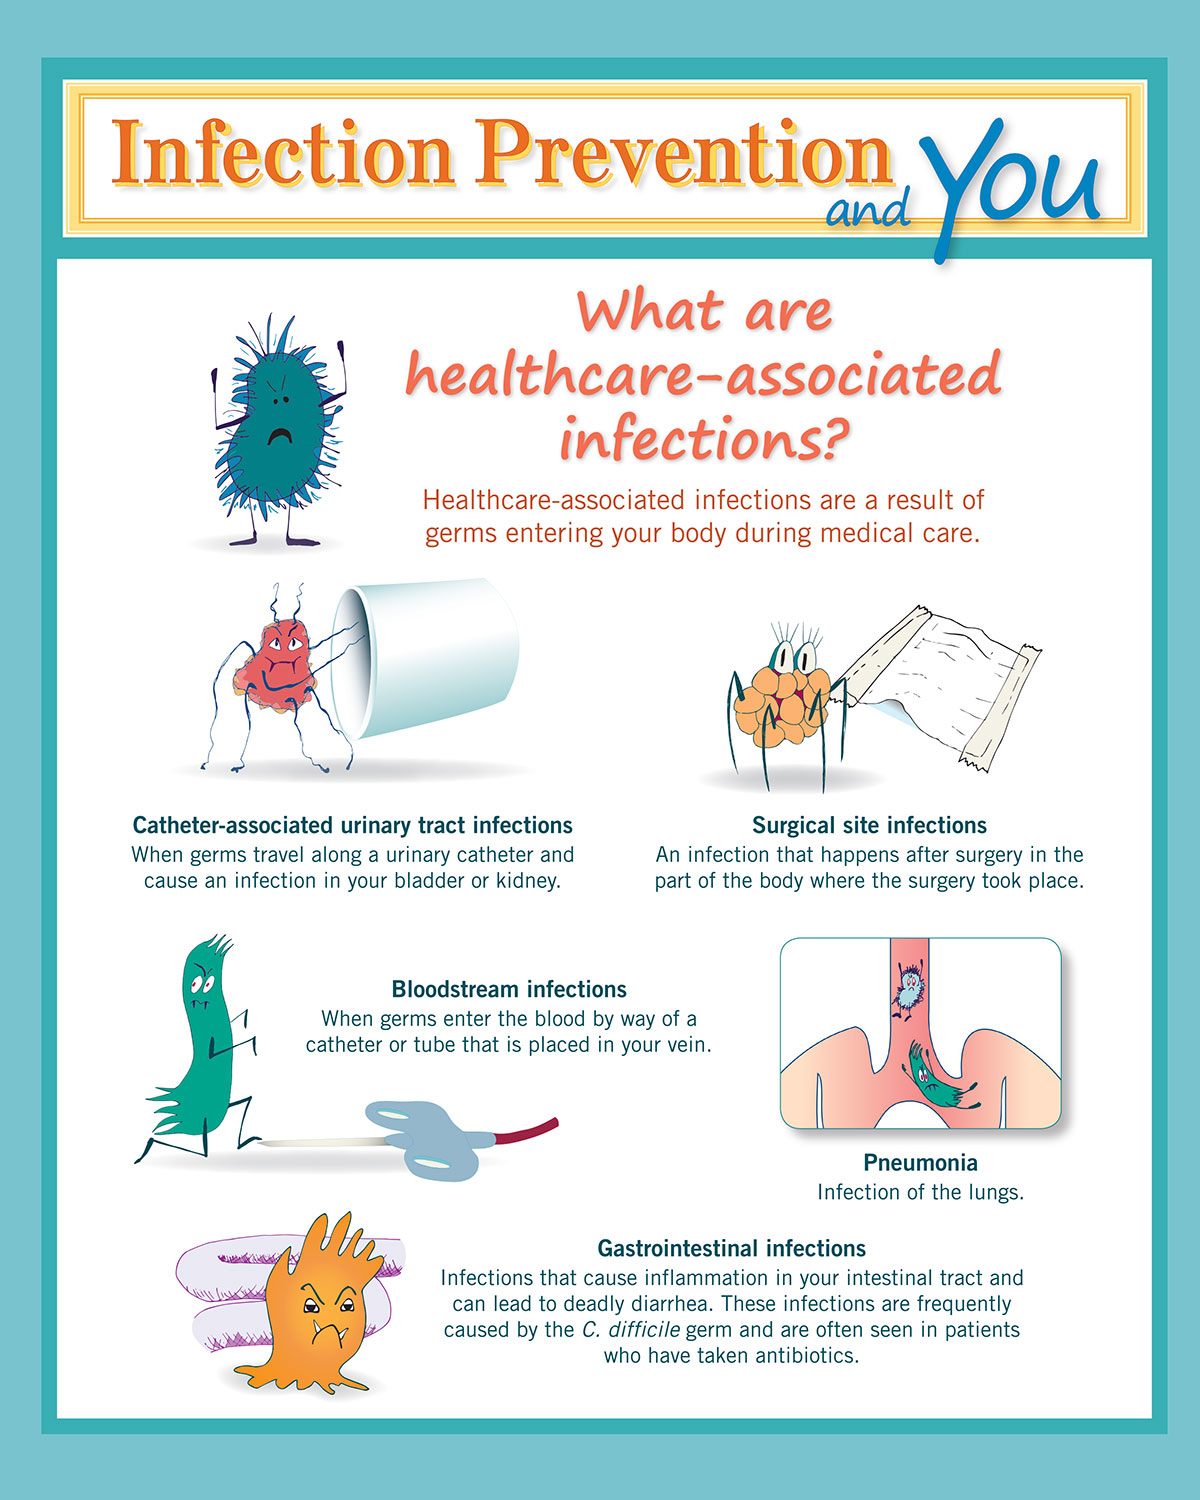 What are healthcare-associated infections?